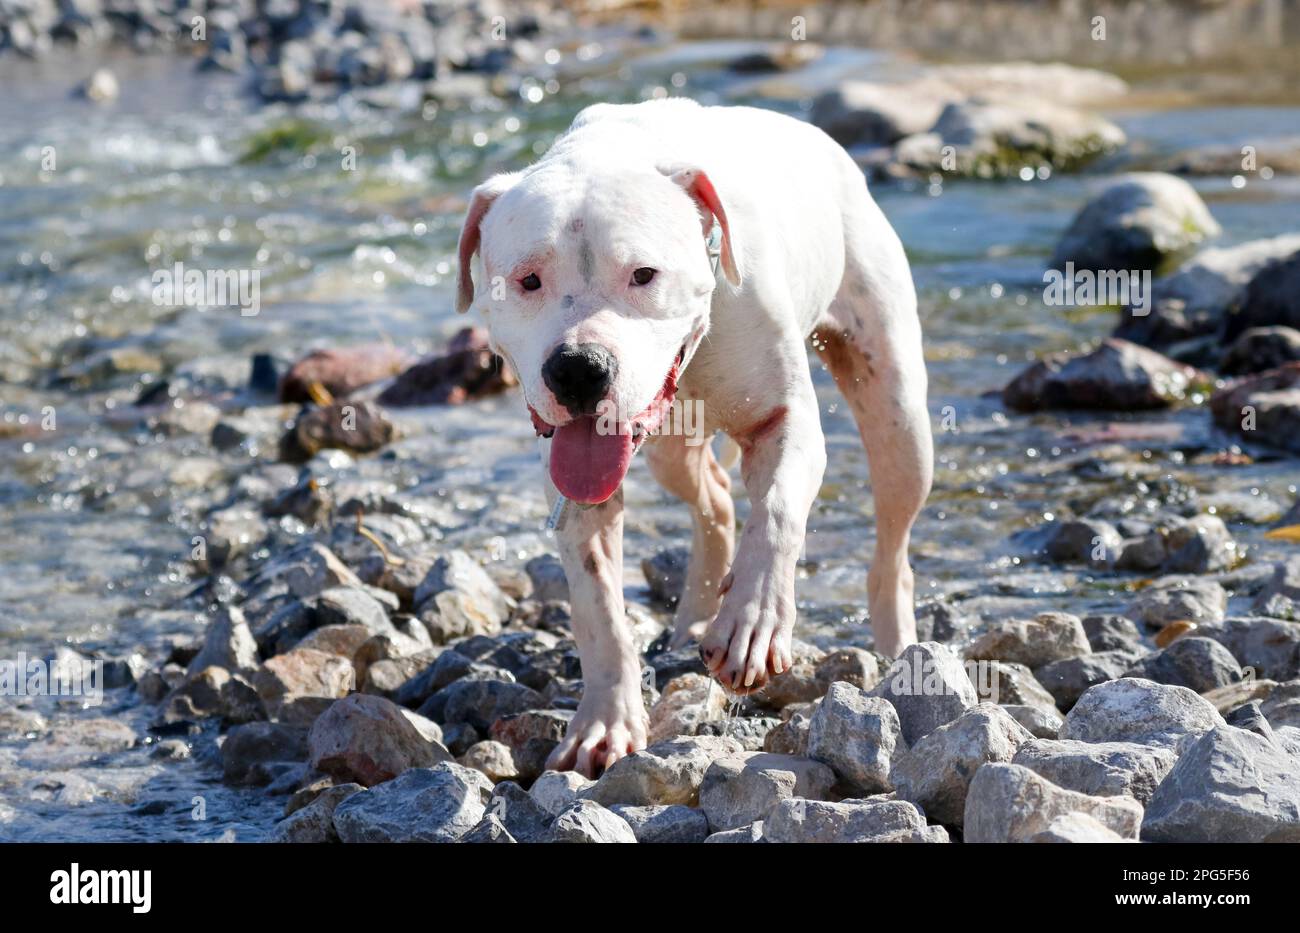 Pitbull on the rock crossing the water at a creek Stock Photo